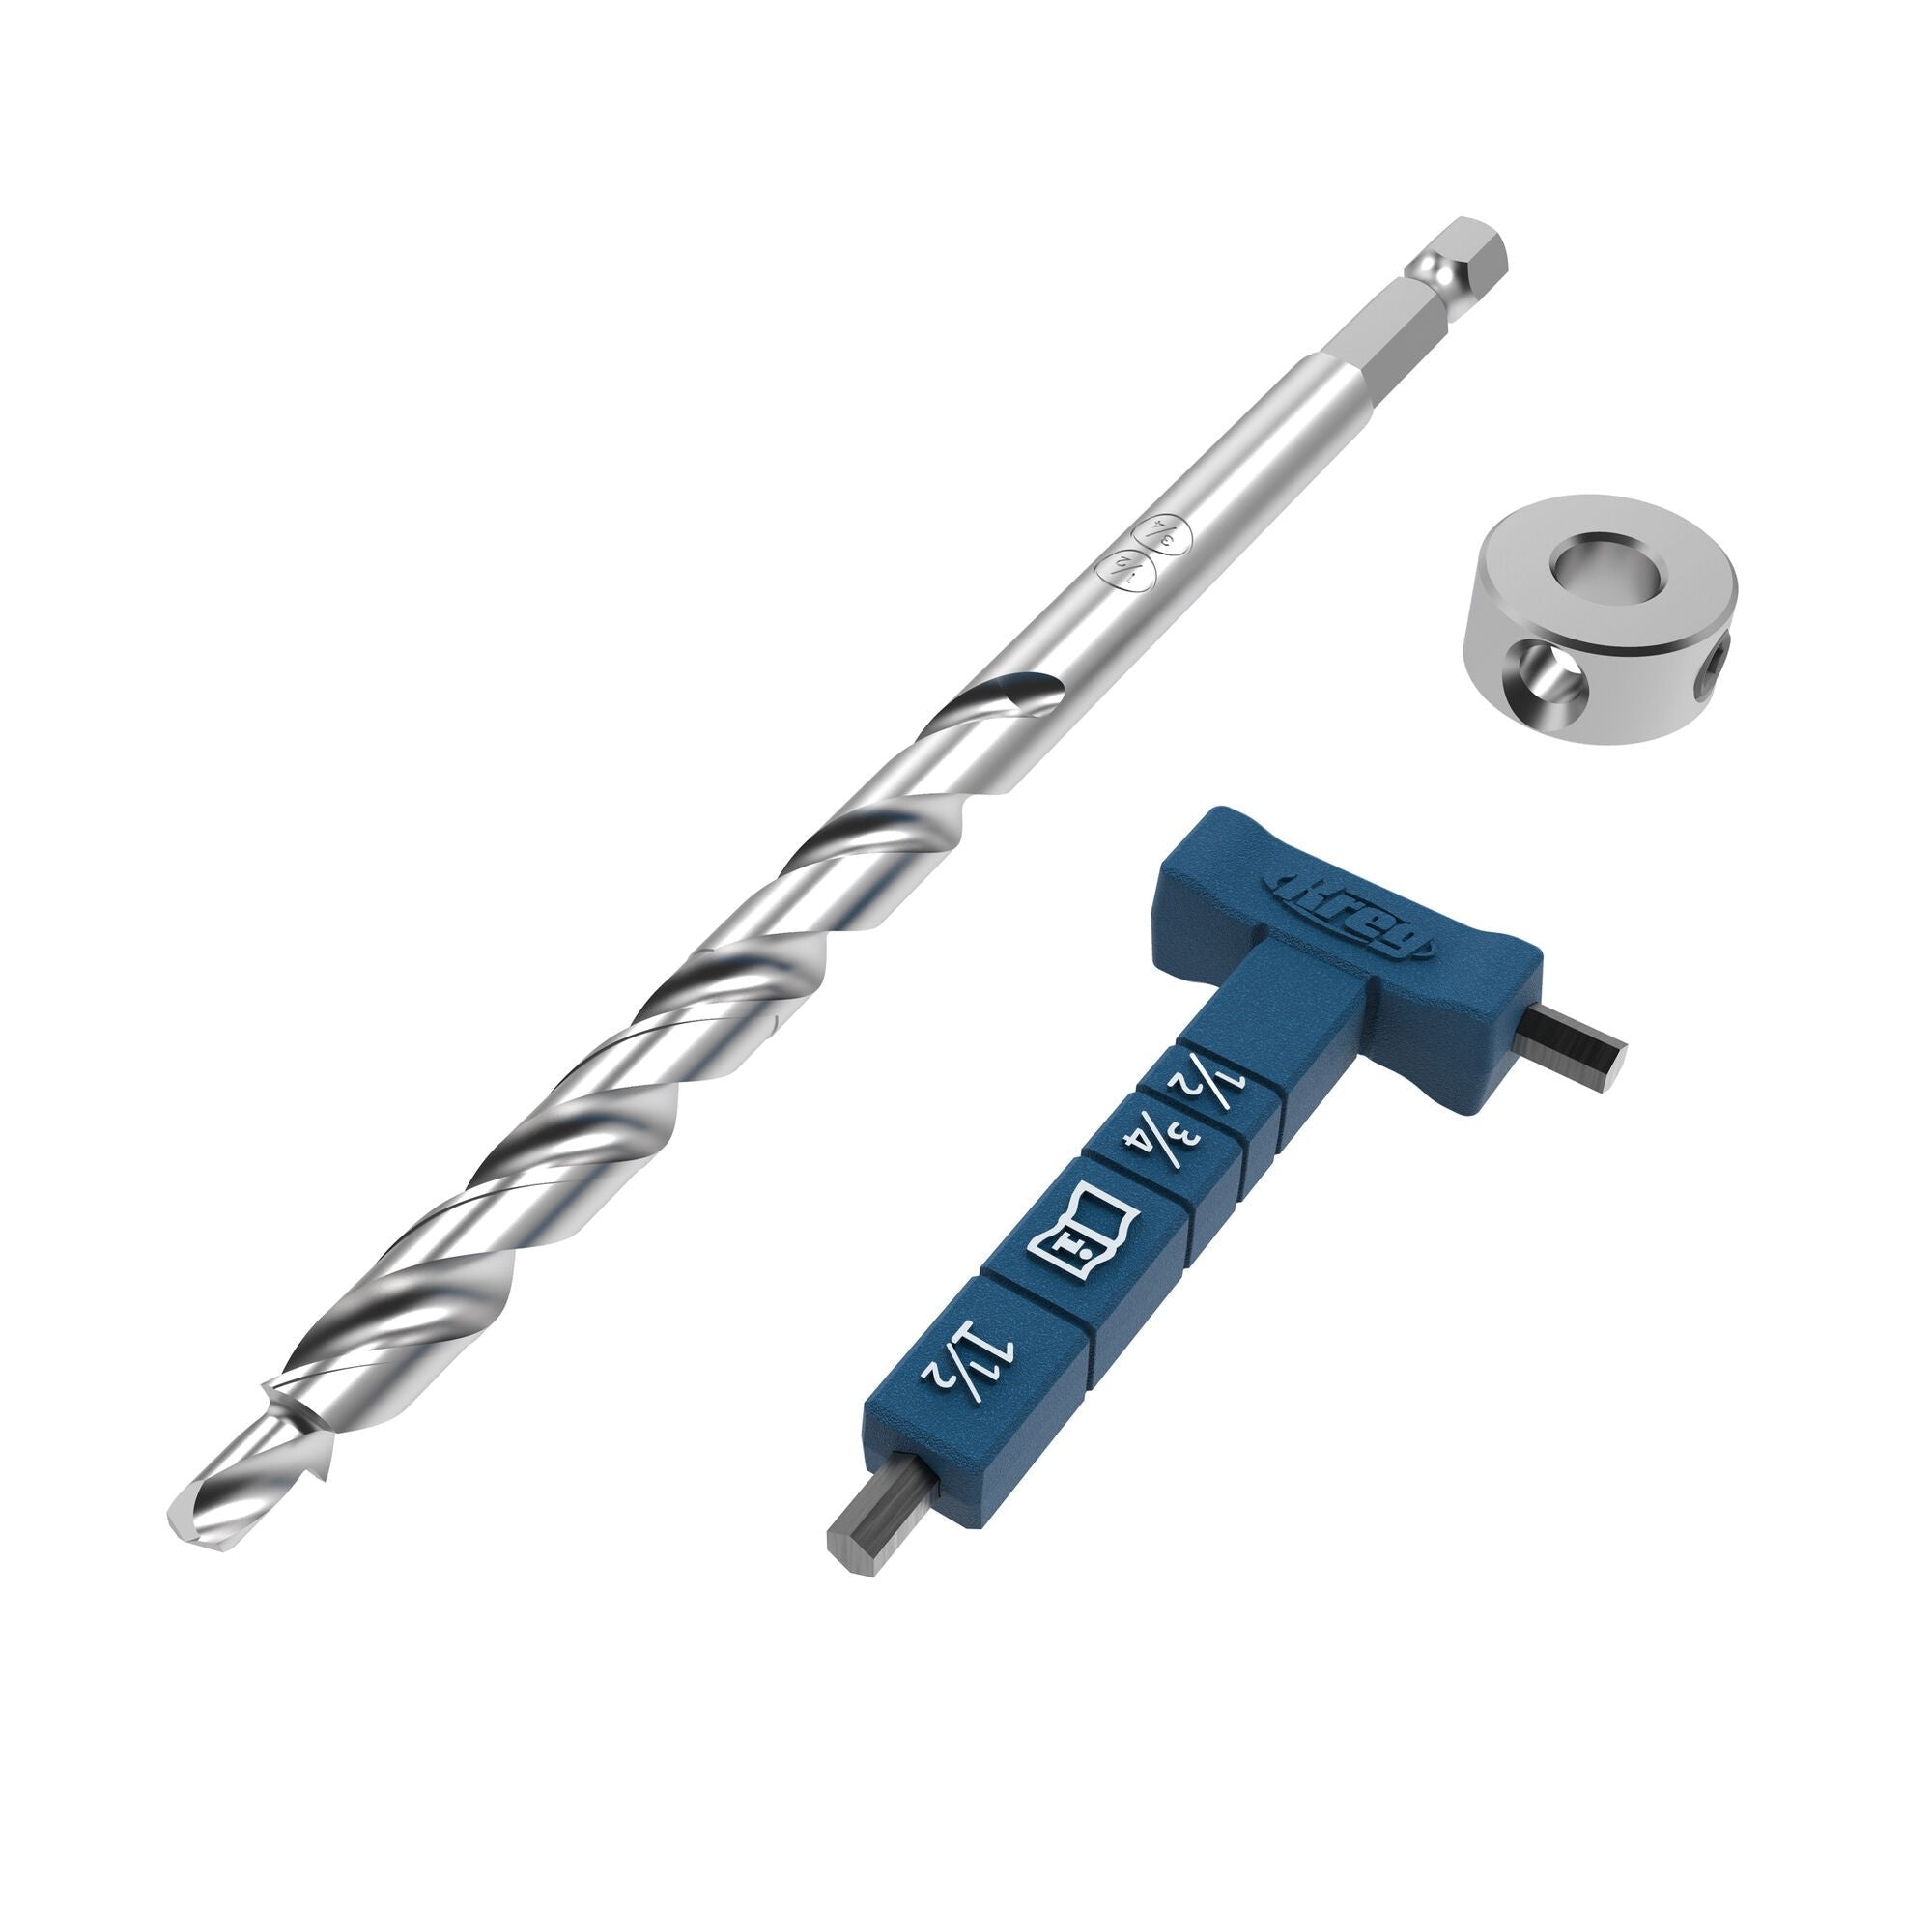 Kreg KPHA540- Micro-Pocket™ Drill Bit with Stop Collar & Hex Wrench